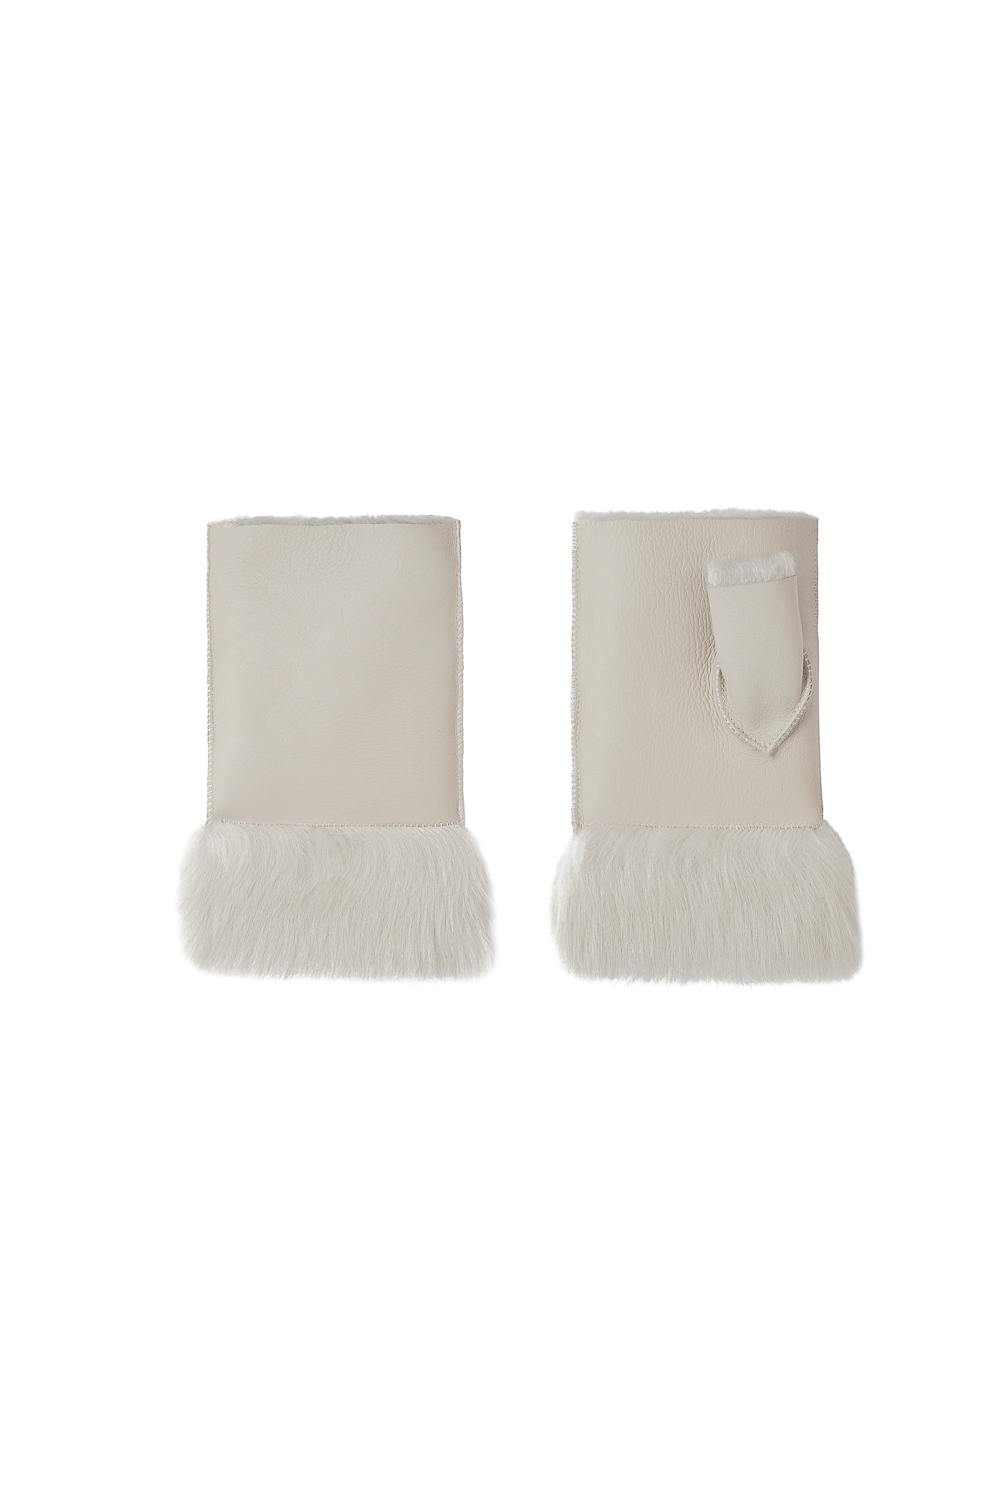 gushlow-and-cole-cuffed-mini-shearling-mittens-3